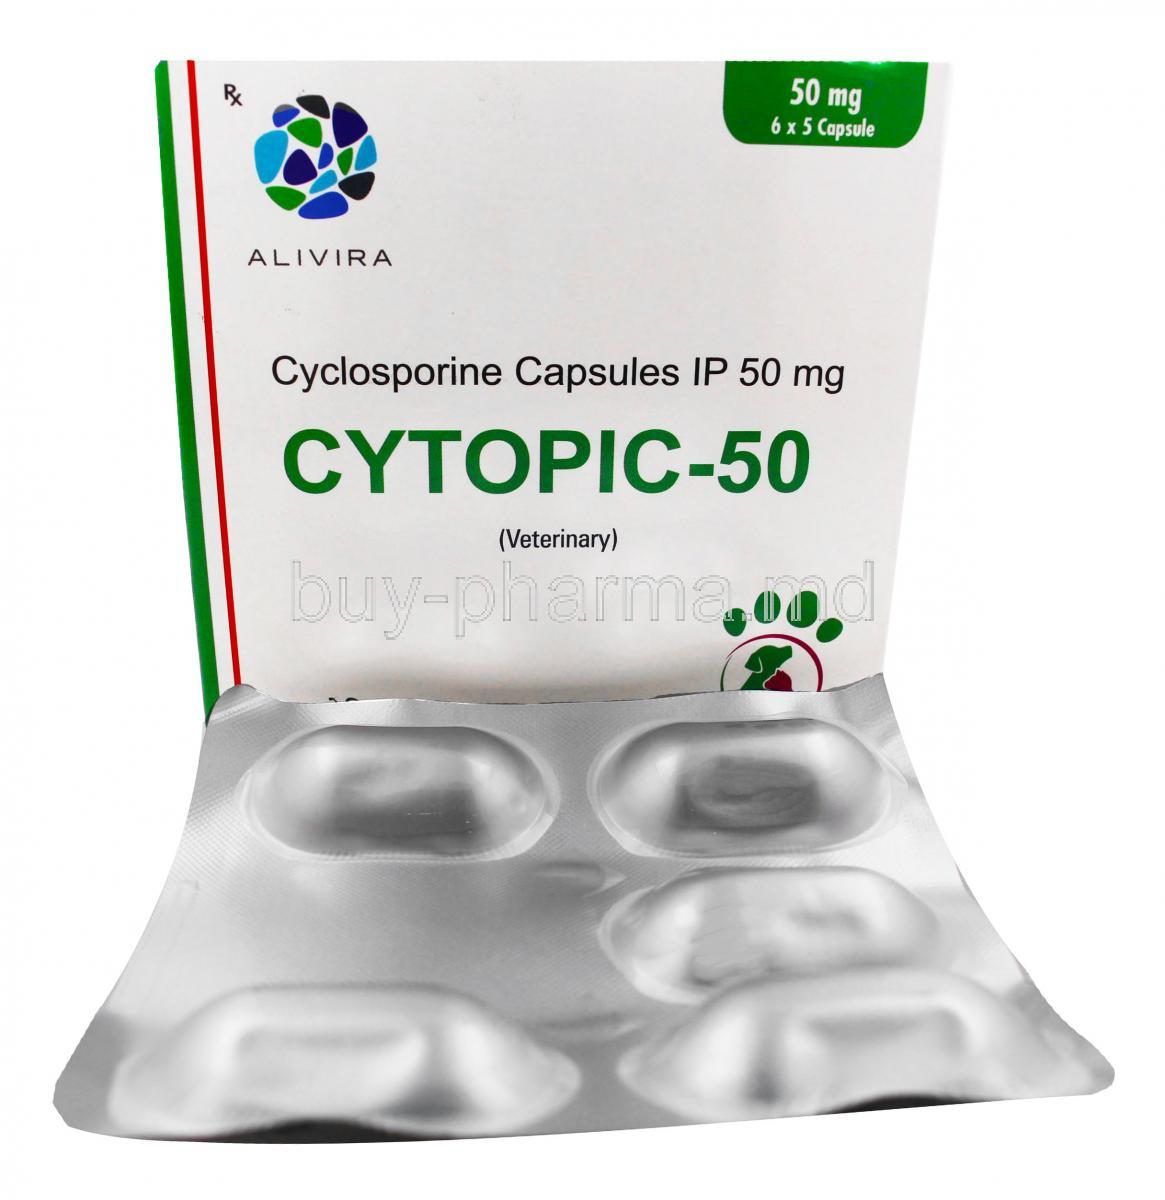 Cytopic for Pets box and capsules